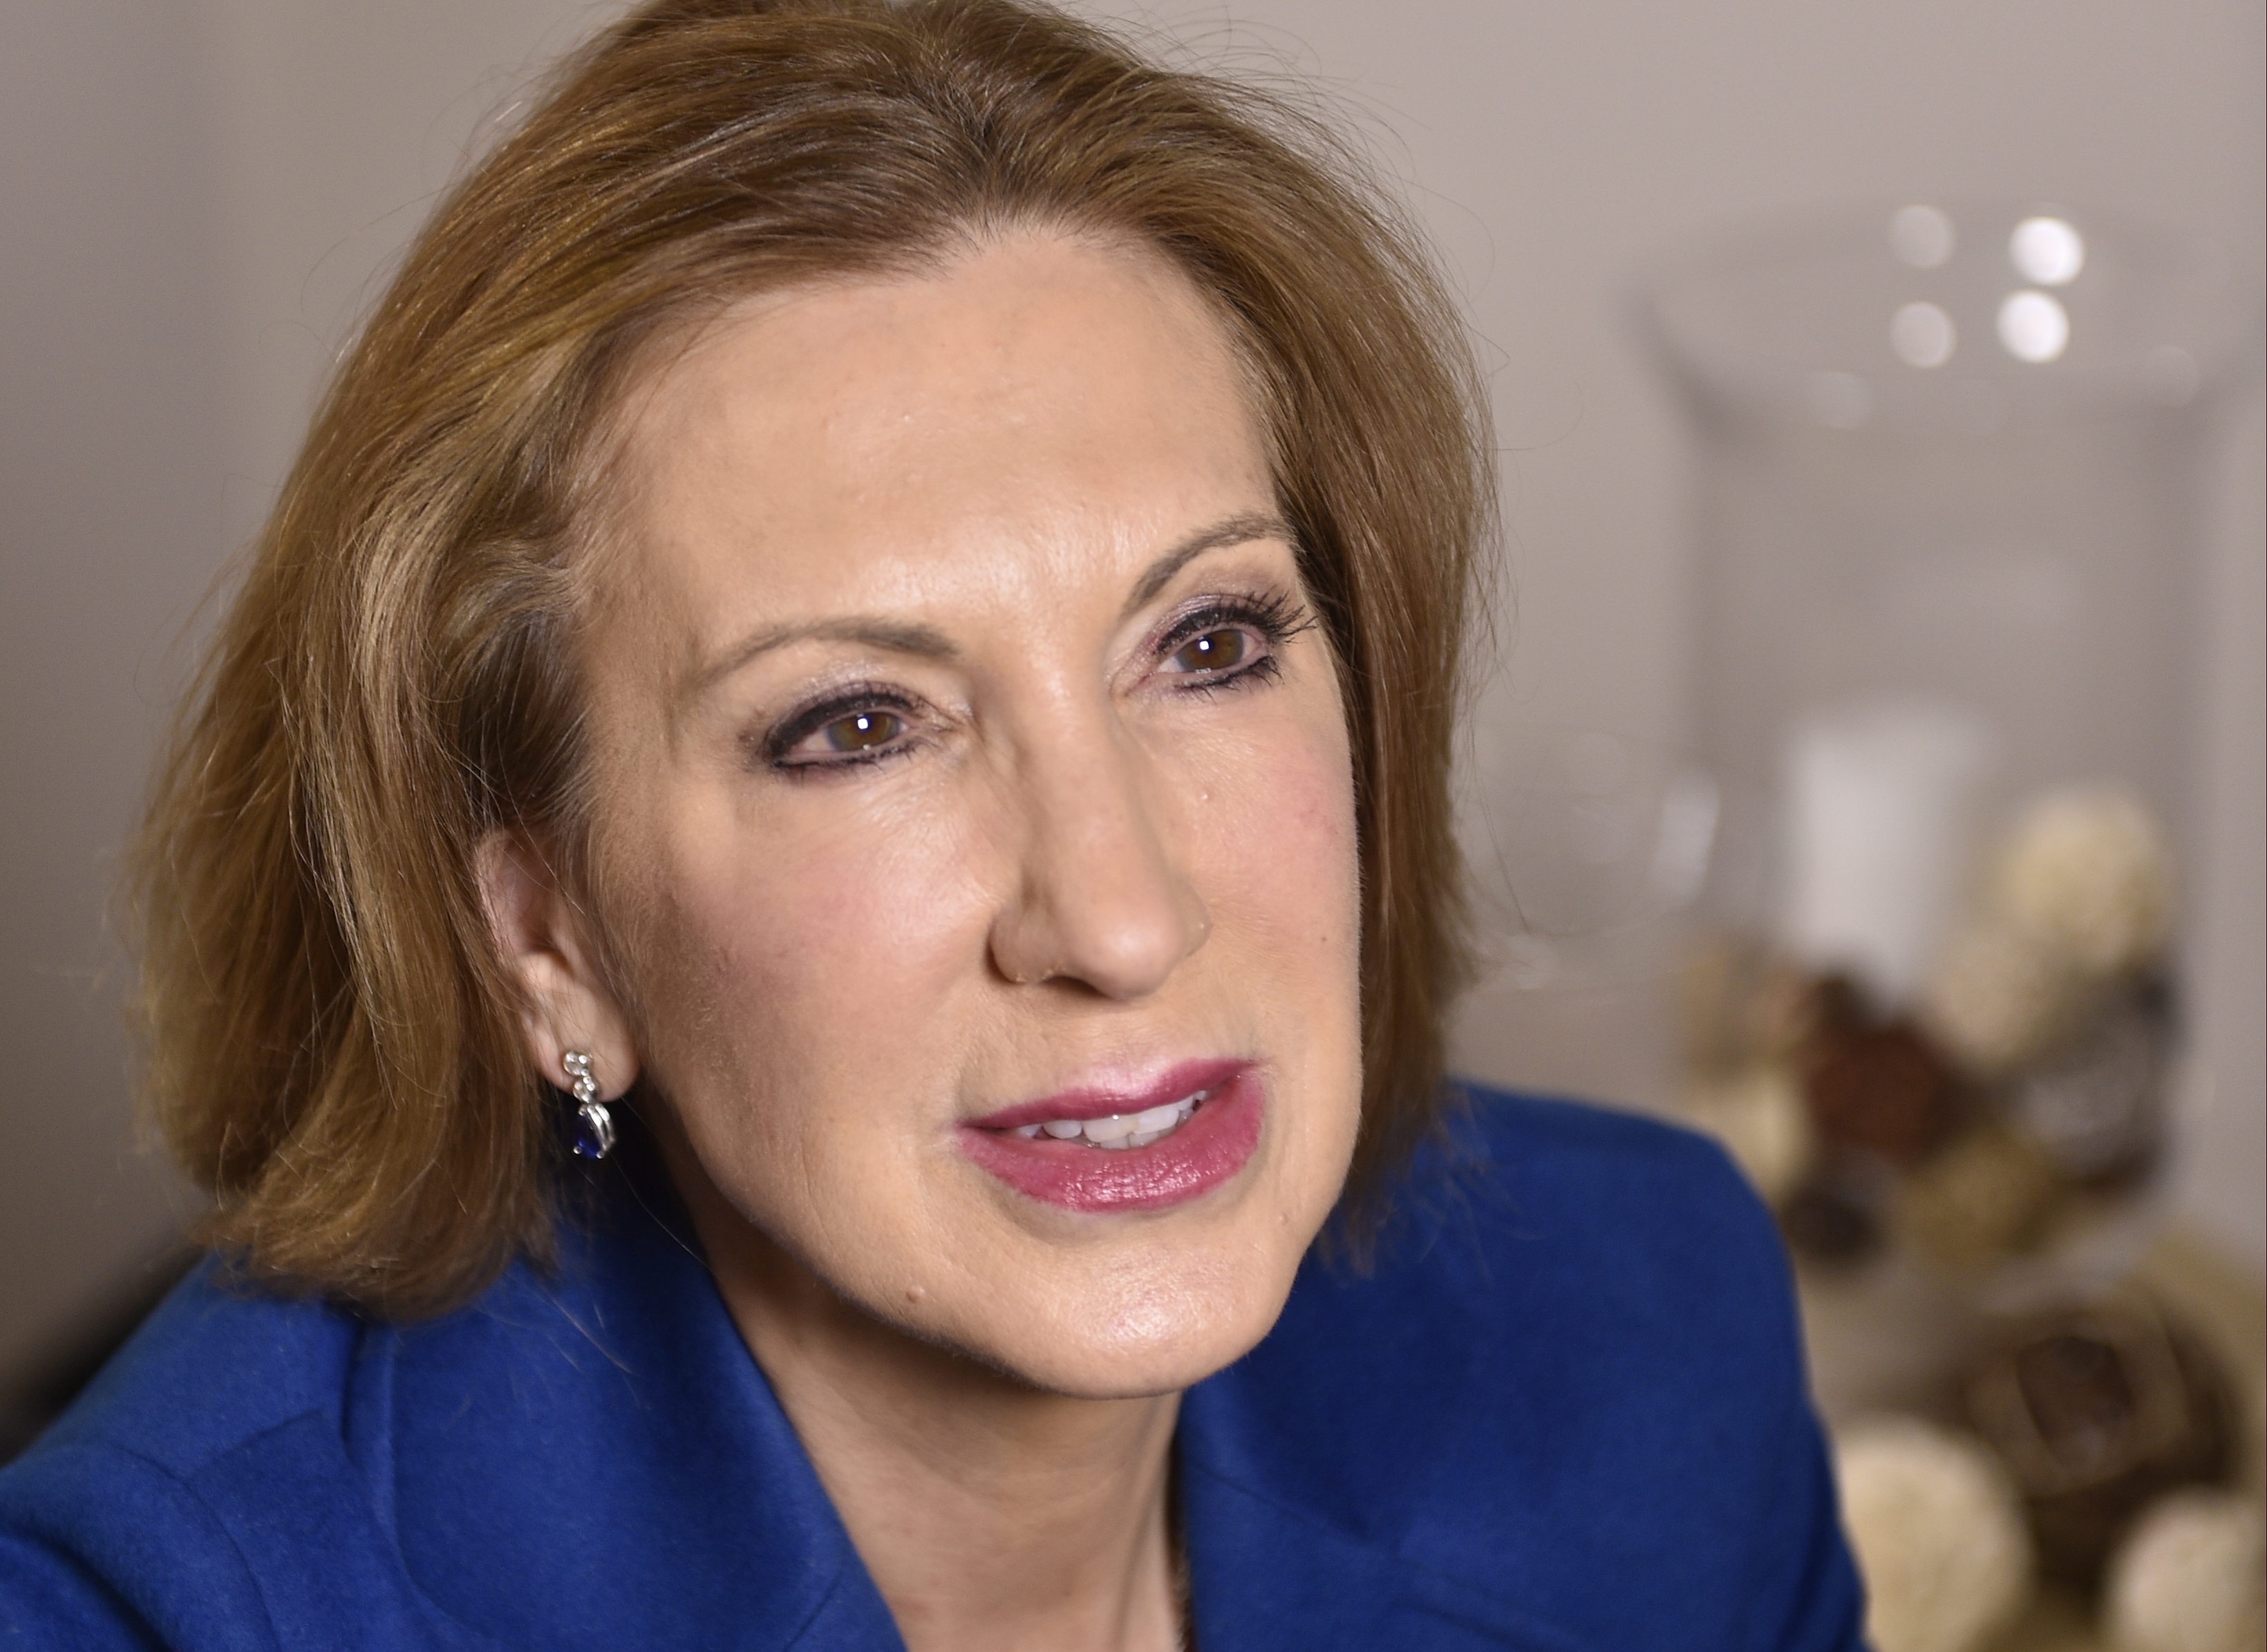 Carly Fiorina Equal Benefits For Gay Couples